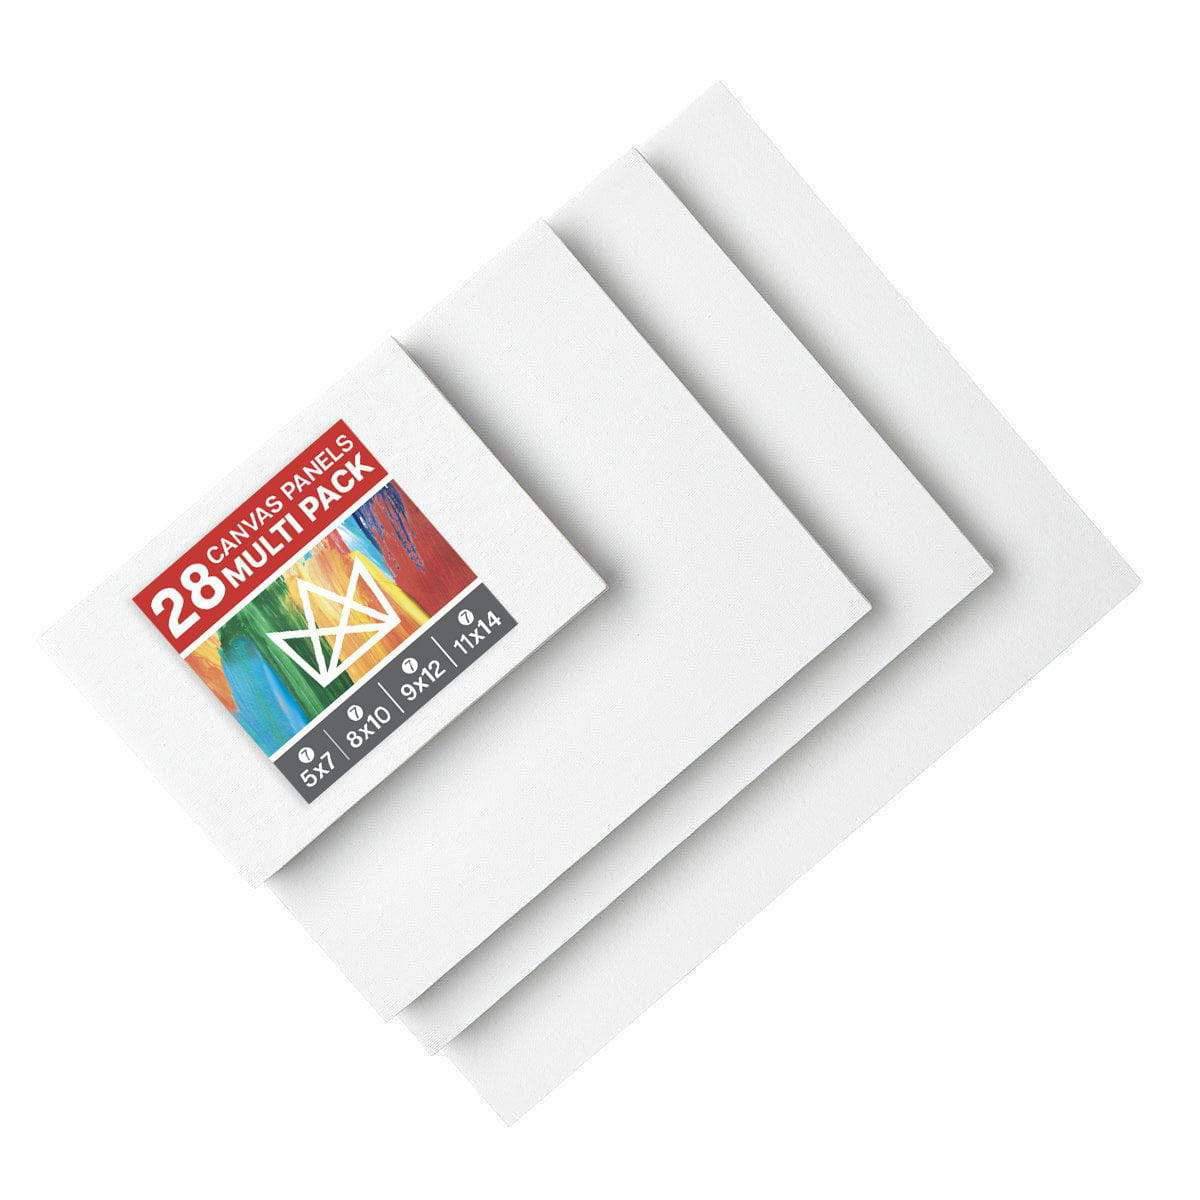 Painting Canvas Pack,Stretched Canvas Boards for Painting , 5x7